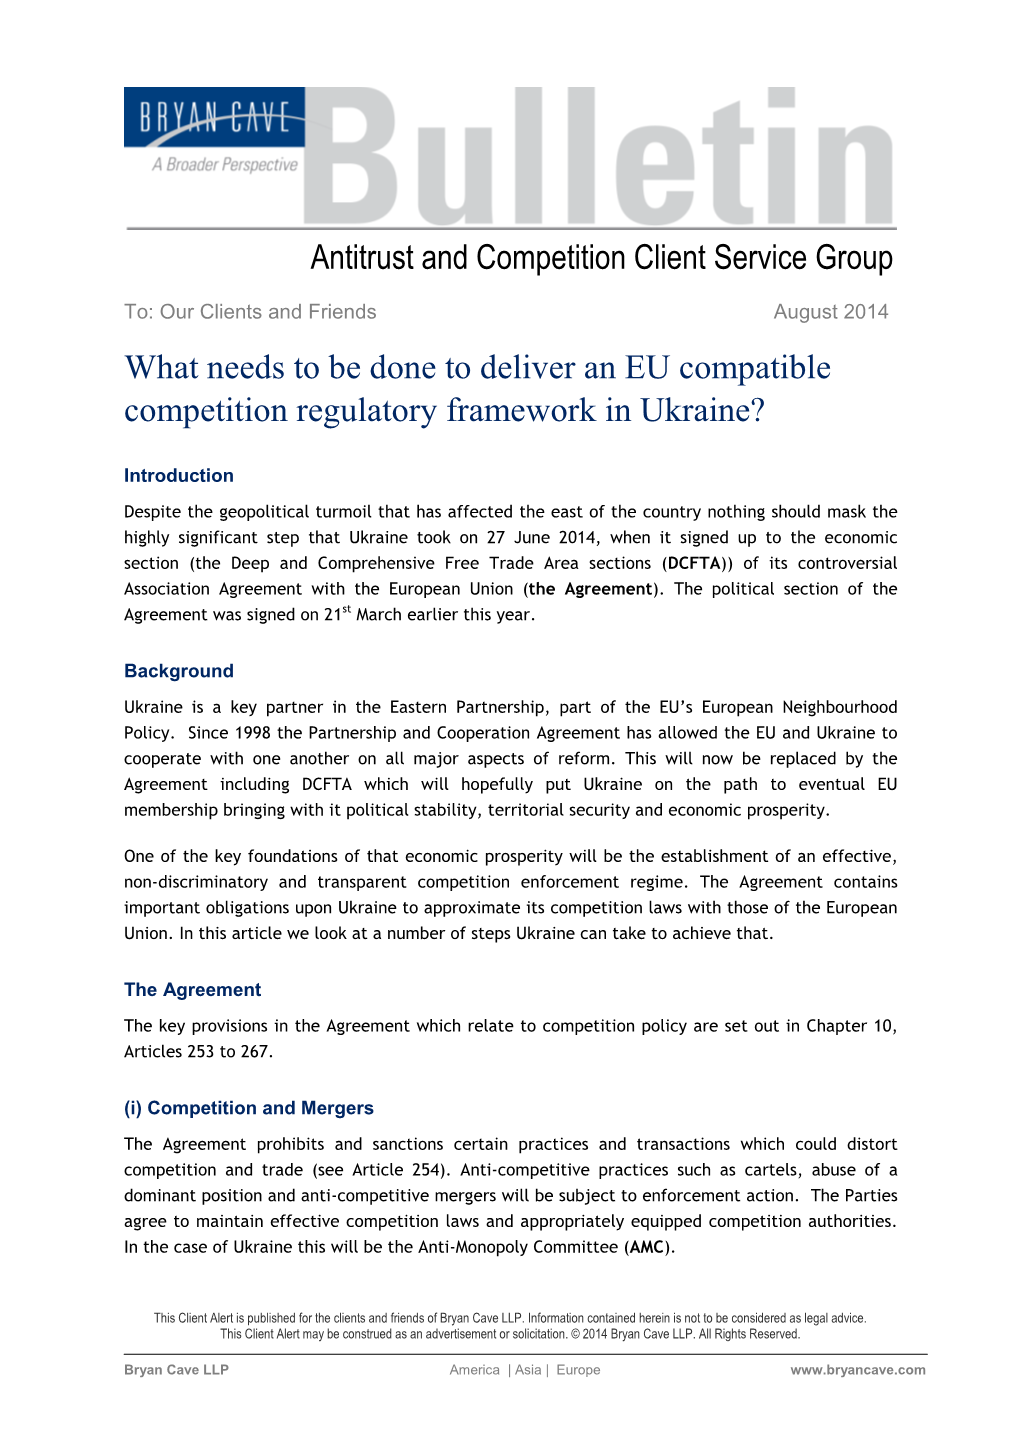 What Needs to Be Done to Deliver an EU Compatible Competition Regulatory Framework in Ukraine? Antitrust and Competition Client